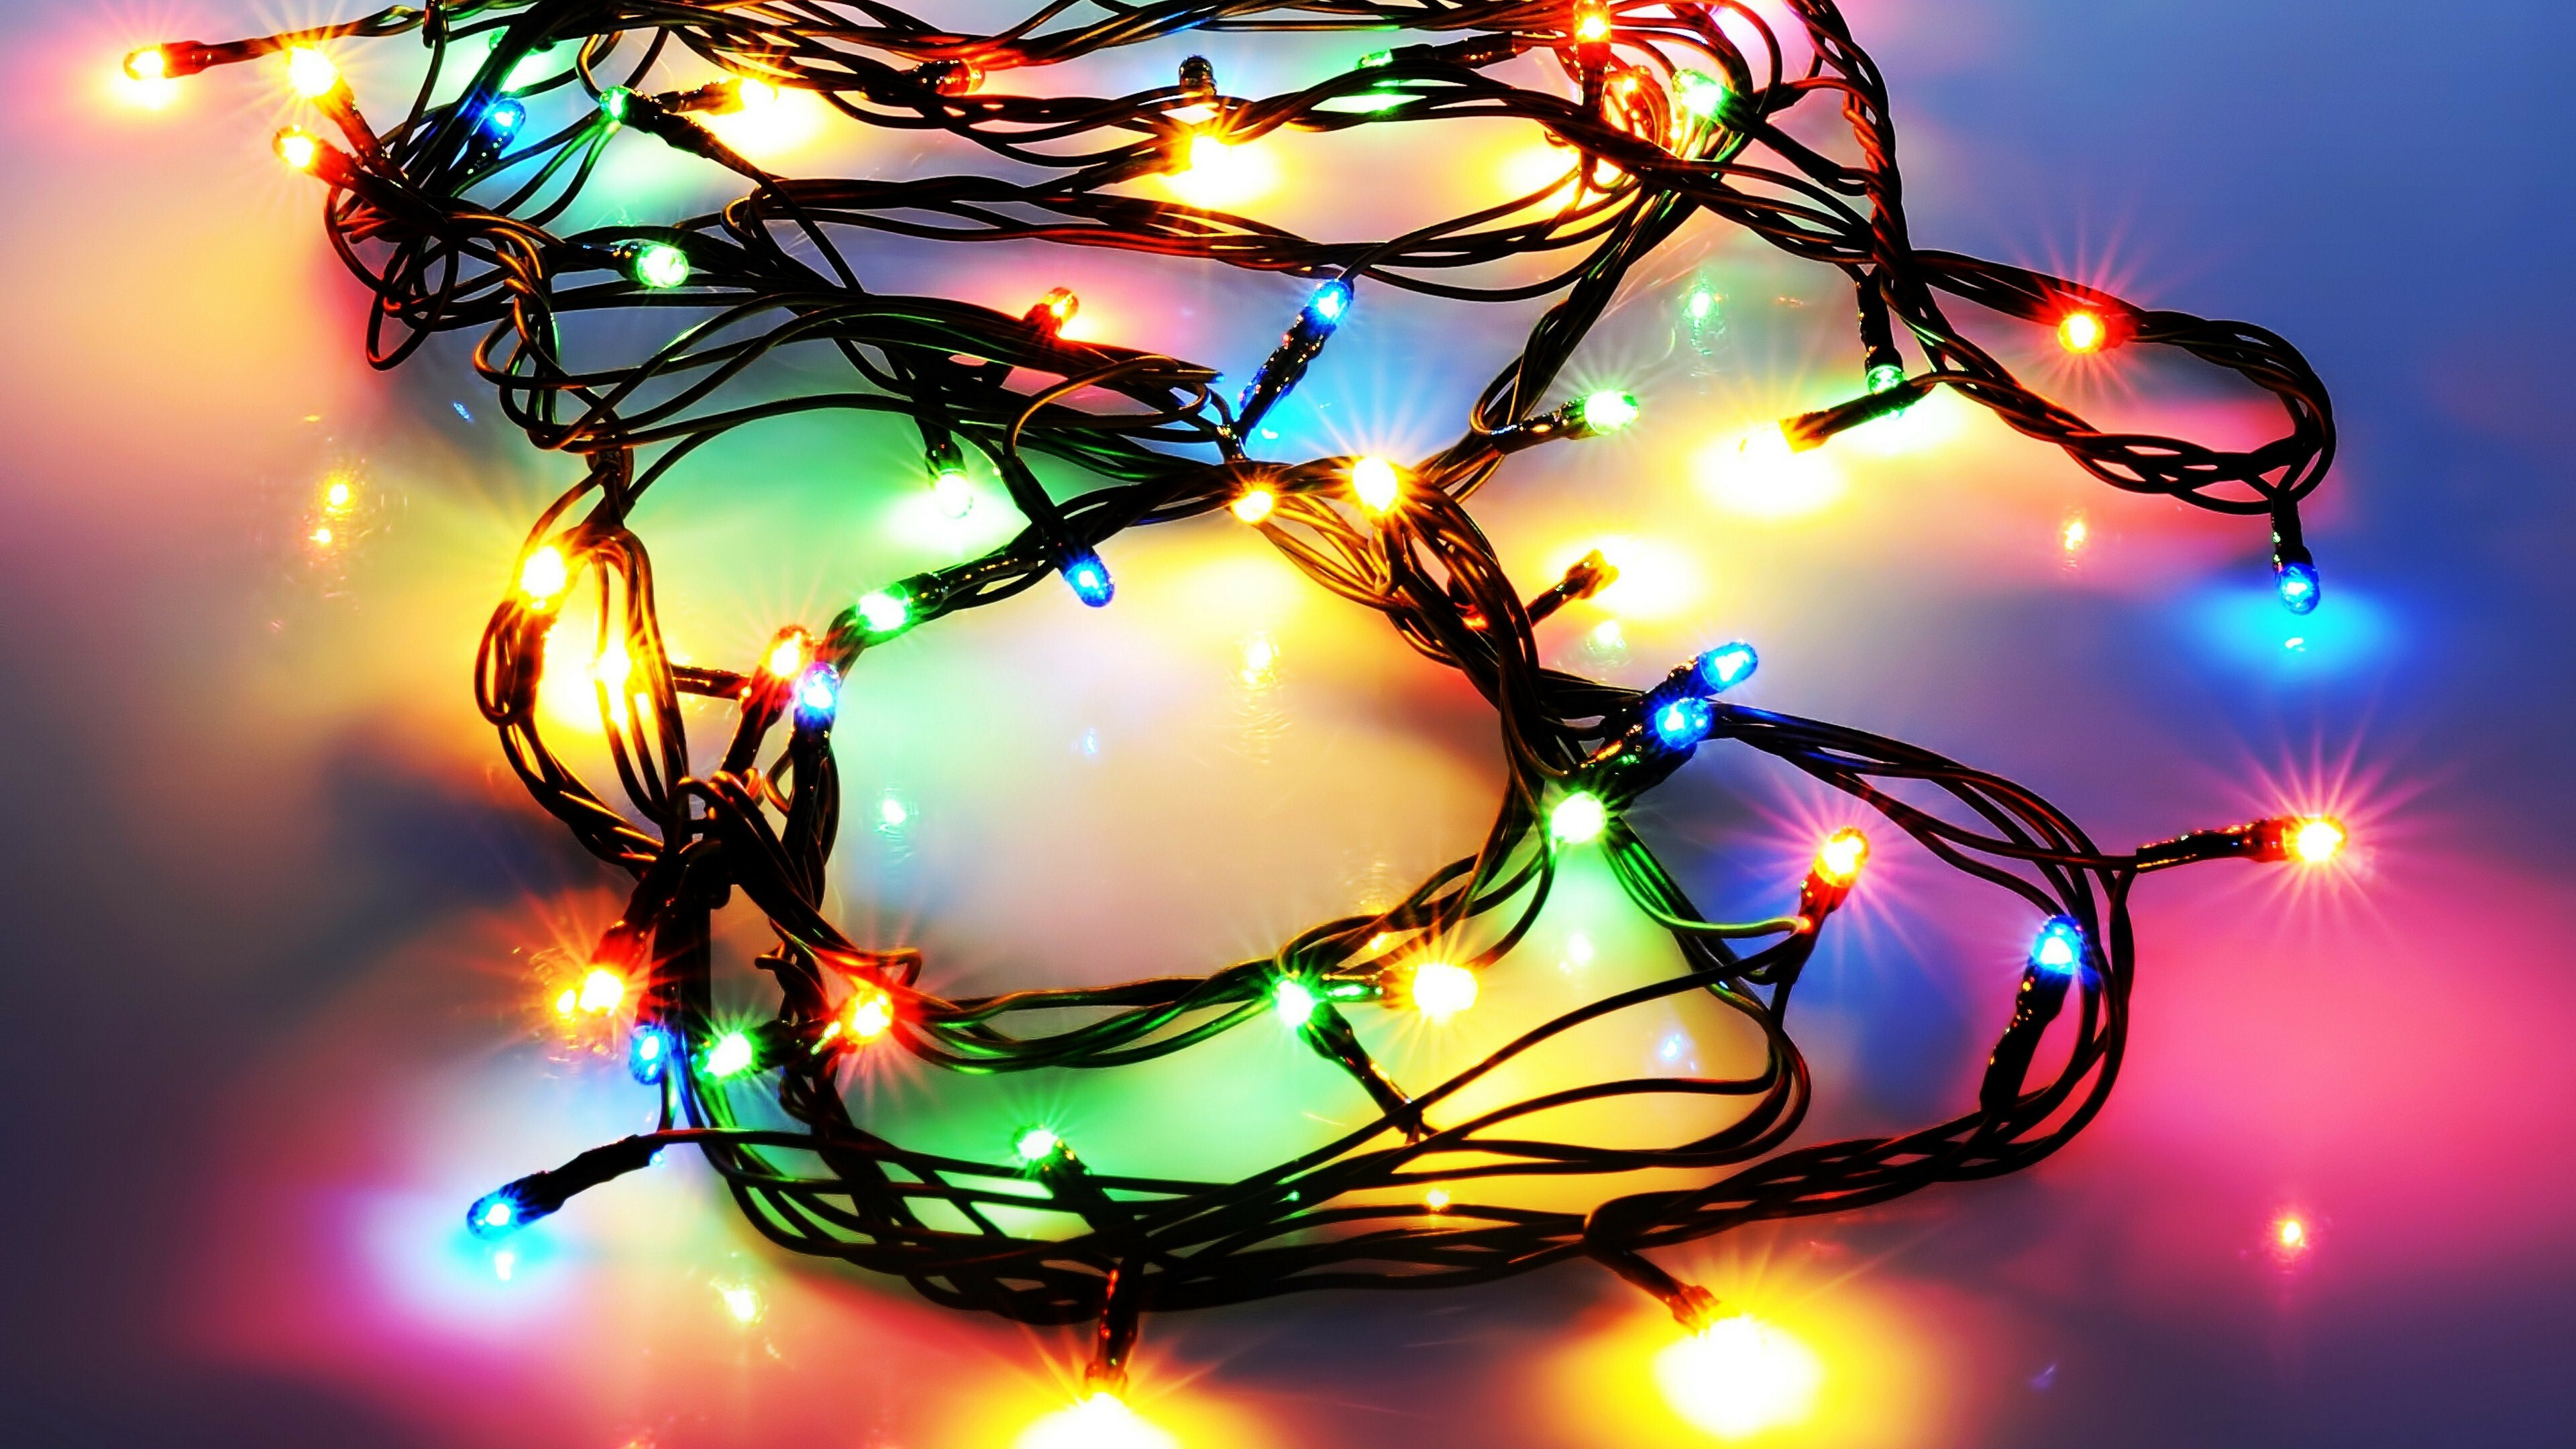 Fairy Lights: The custom goes back to when trees were decorated with candles. 3840x2160 4K Background.